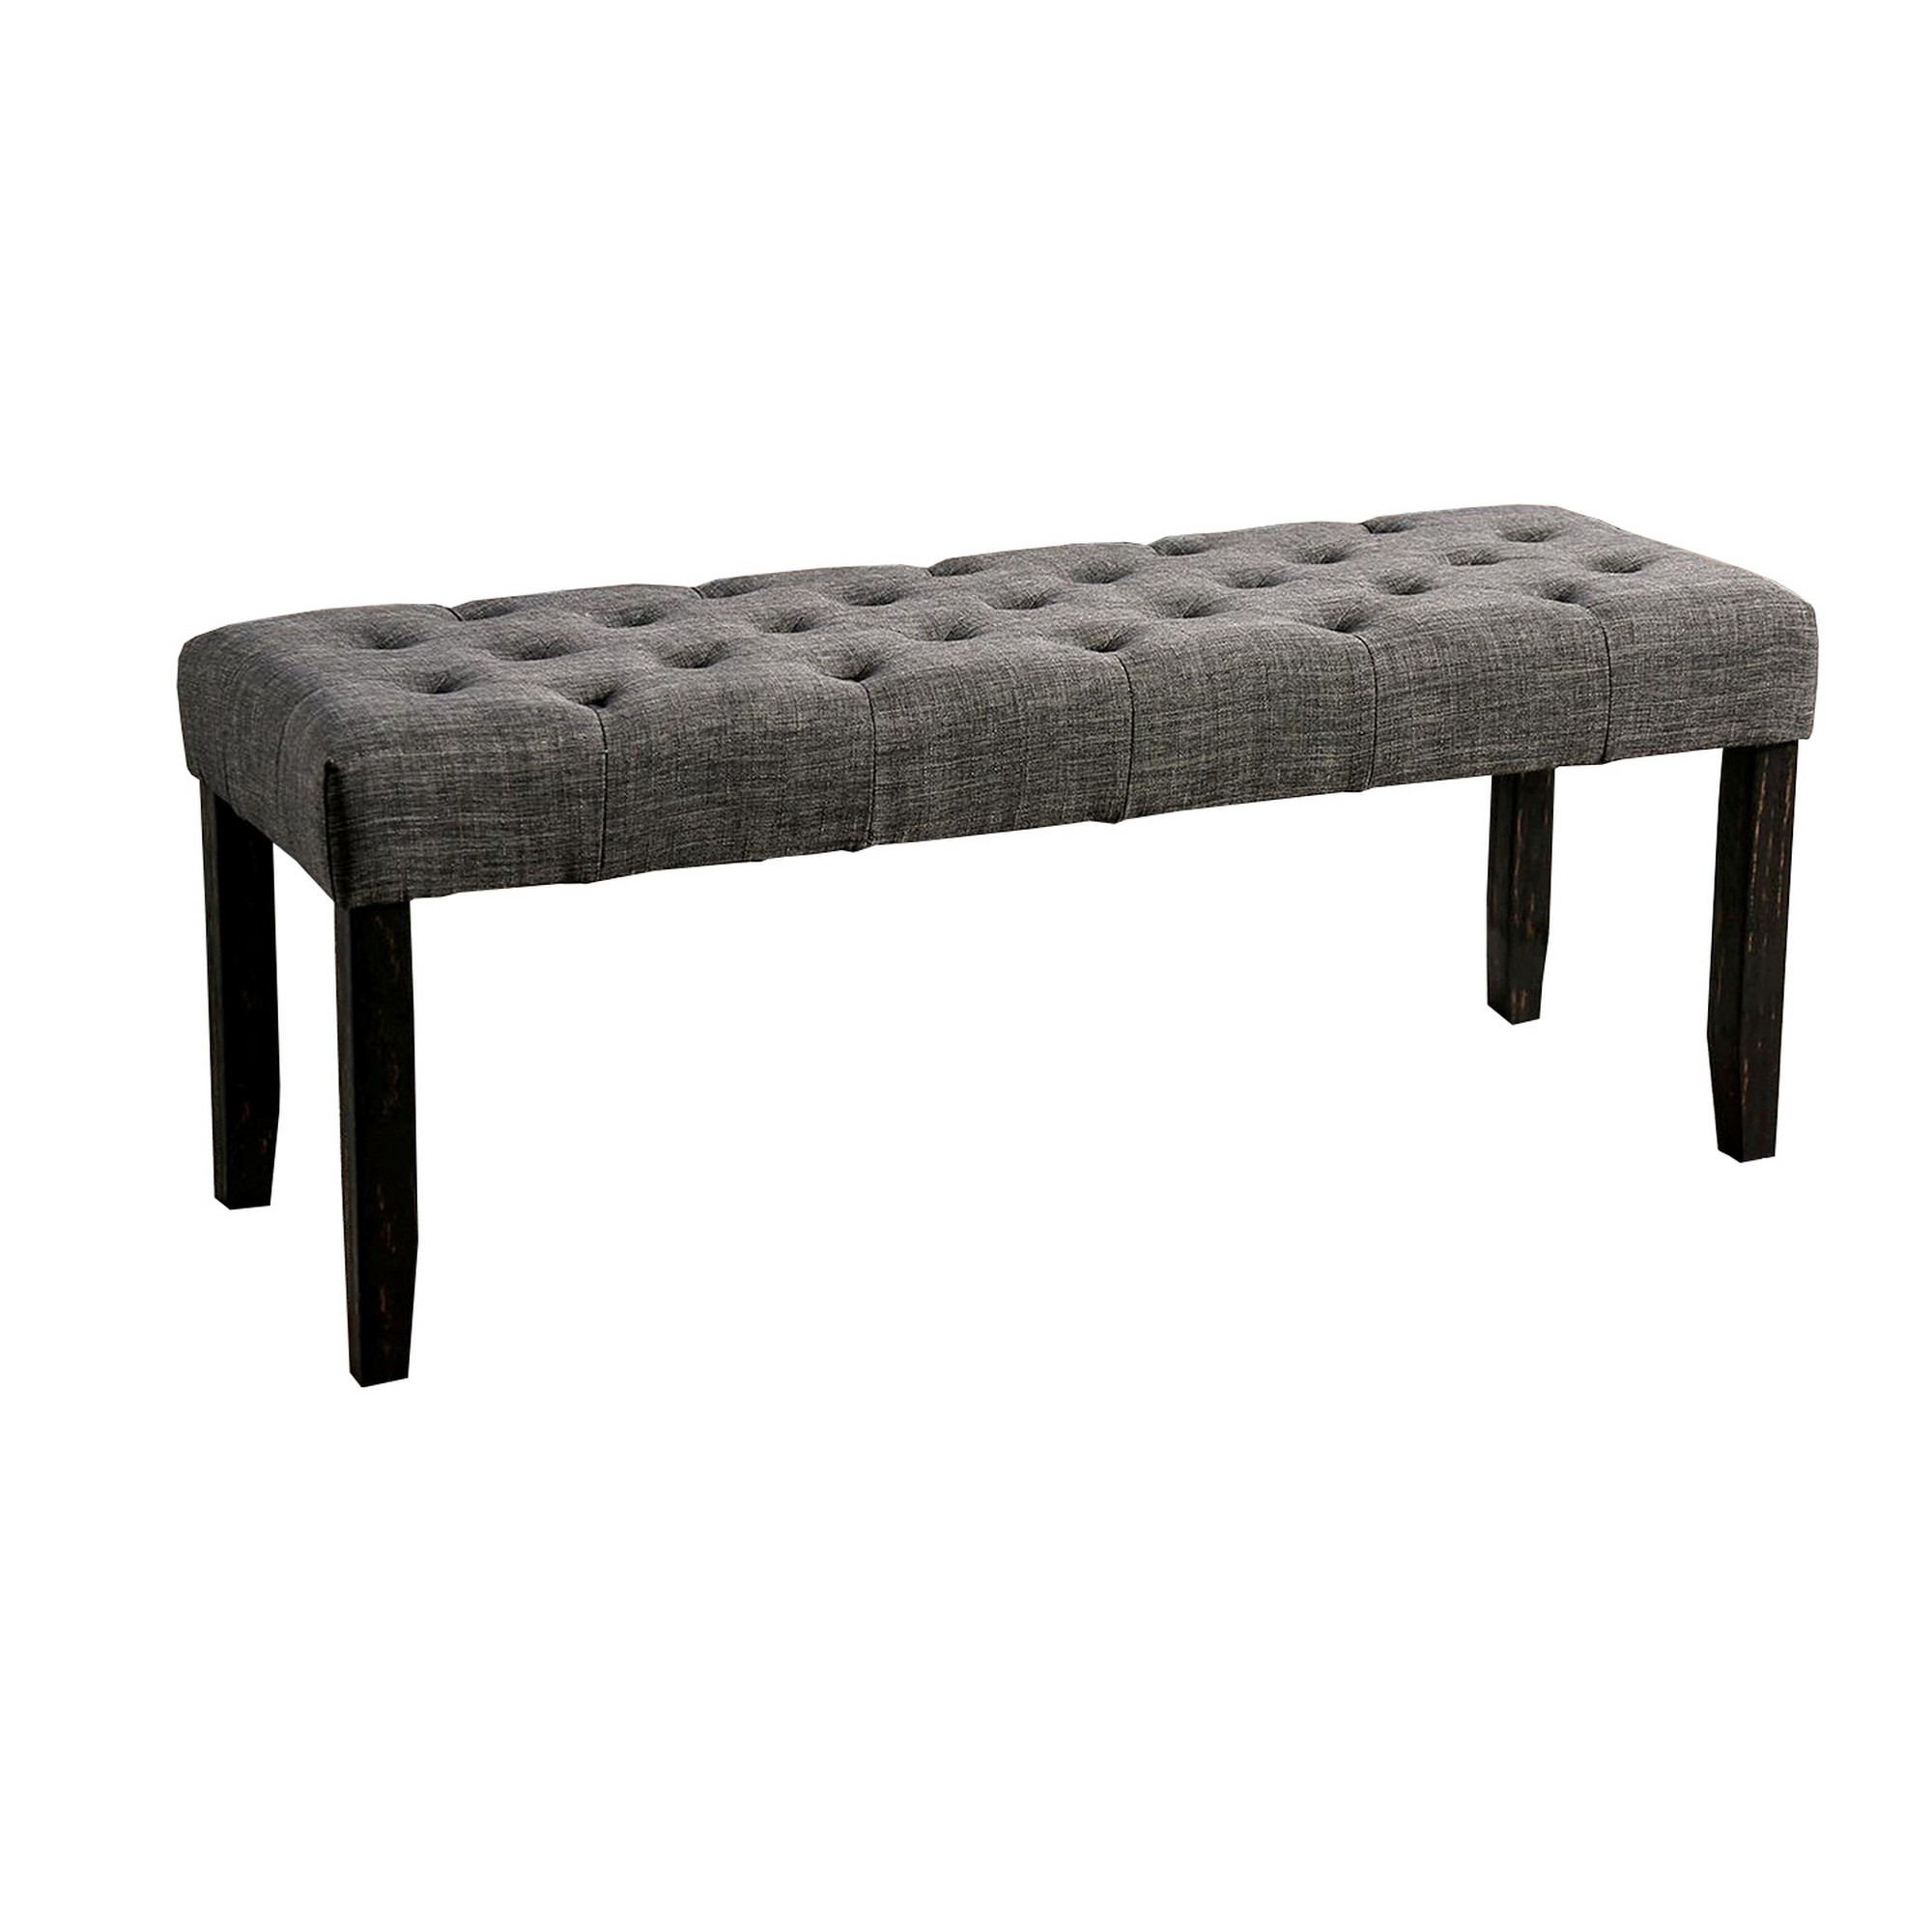 48 Inches Bench With Button Tufted Seat And Chamfered Legs, Gray- Saltoro Sherpi